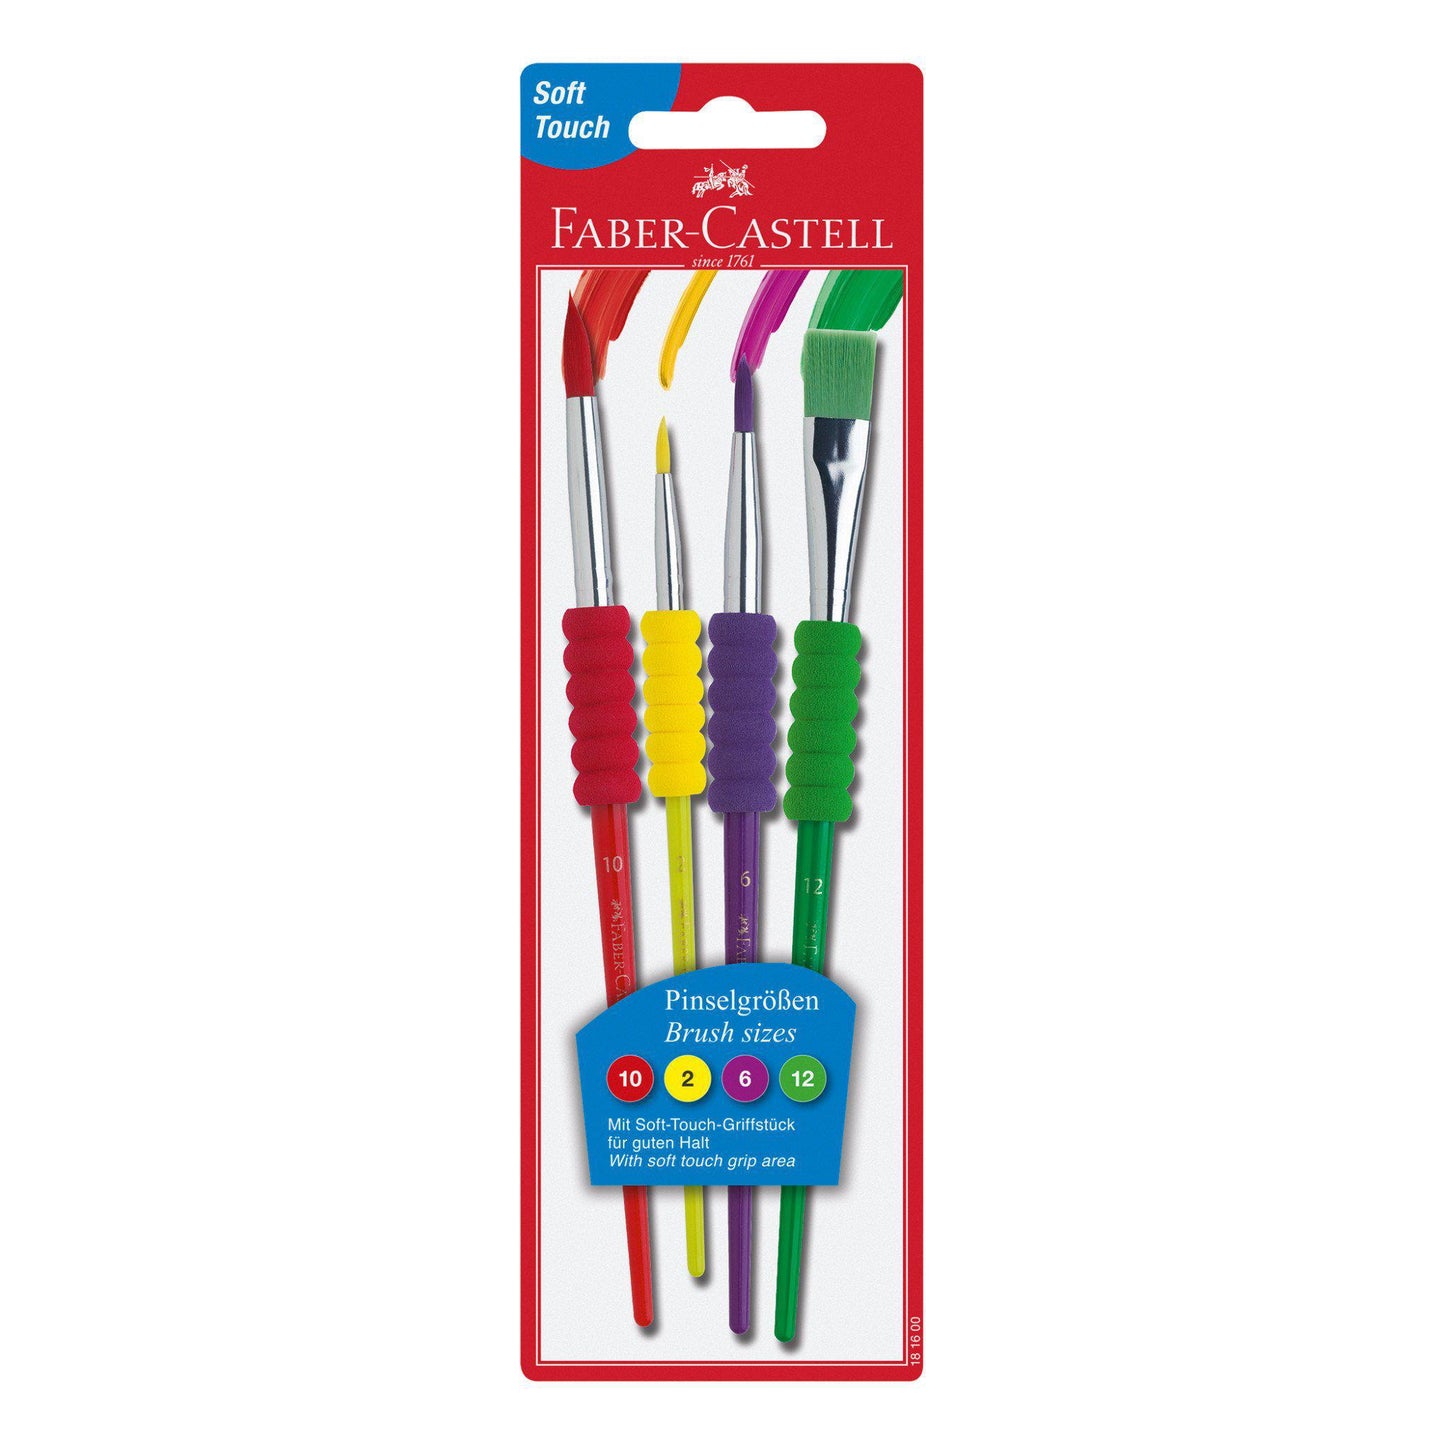 Faber-Castell Soft Grip Paint Brush Set - Kids Paint Brushes - 4 Assorted Paintbrushes for Watercolor and Tempera Paint